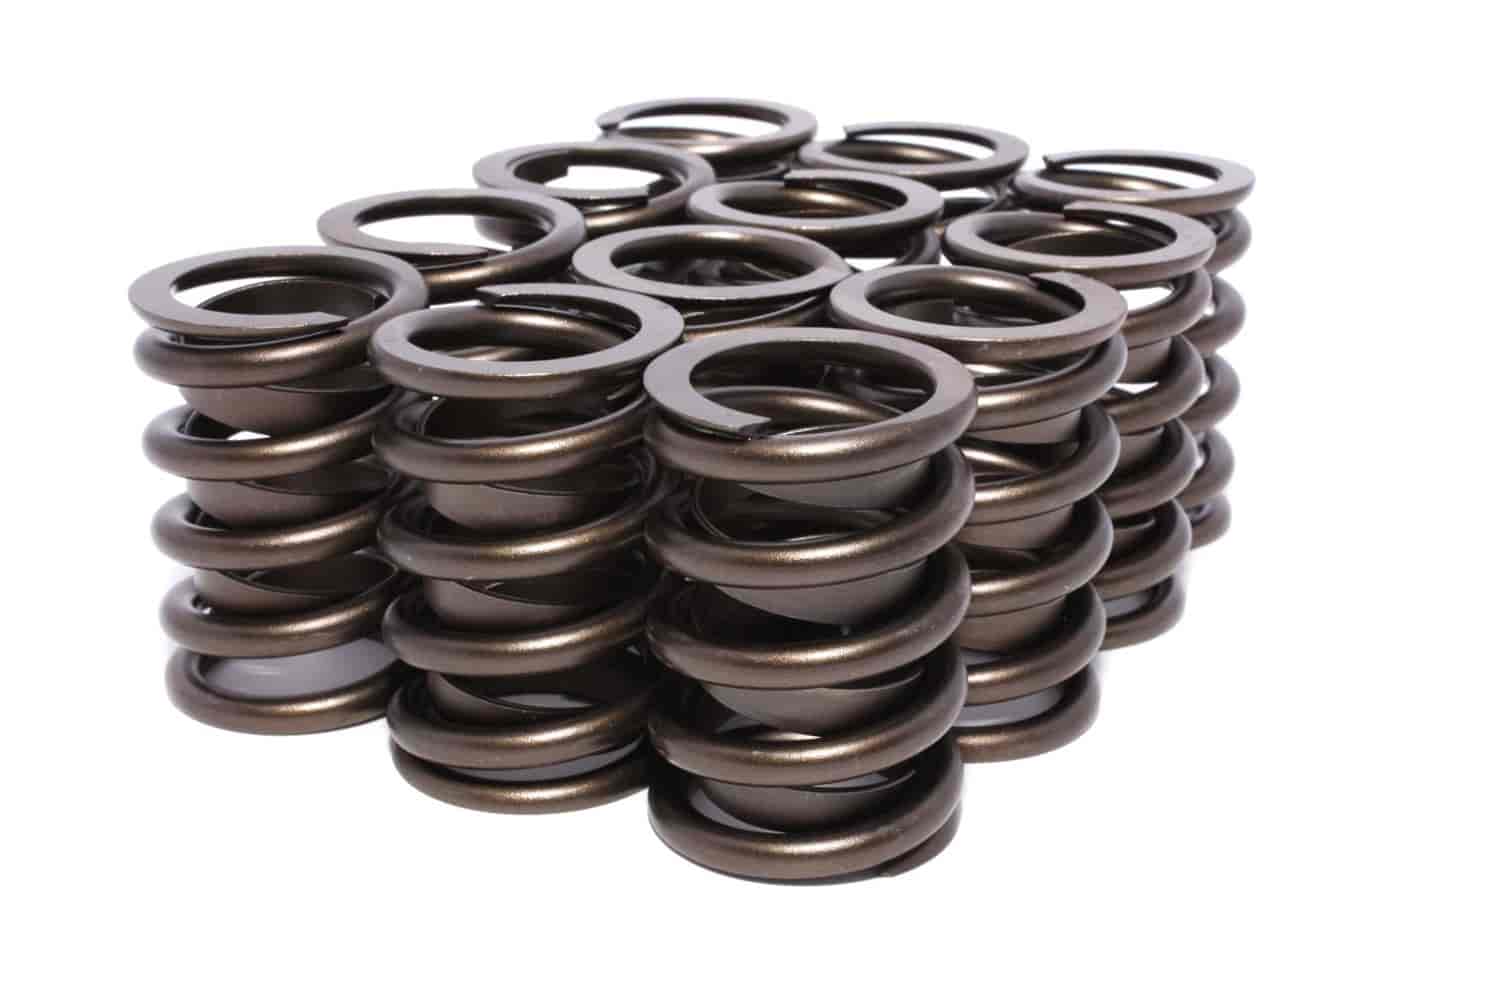 Single Outer Valve Springs Rate: 415 lbs